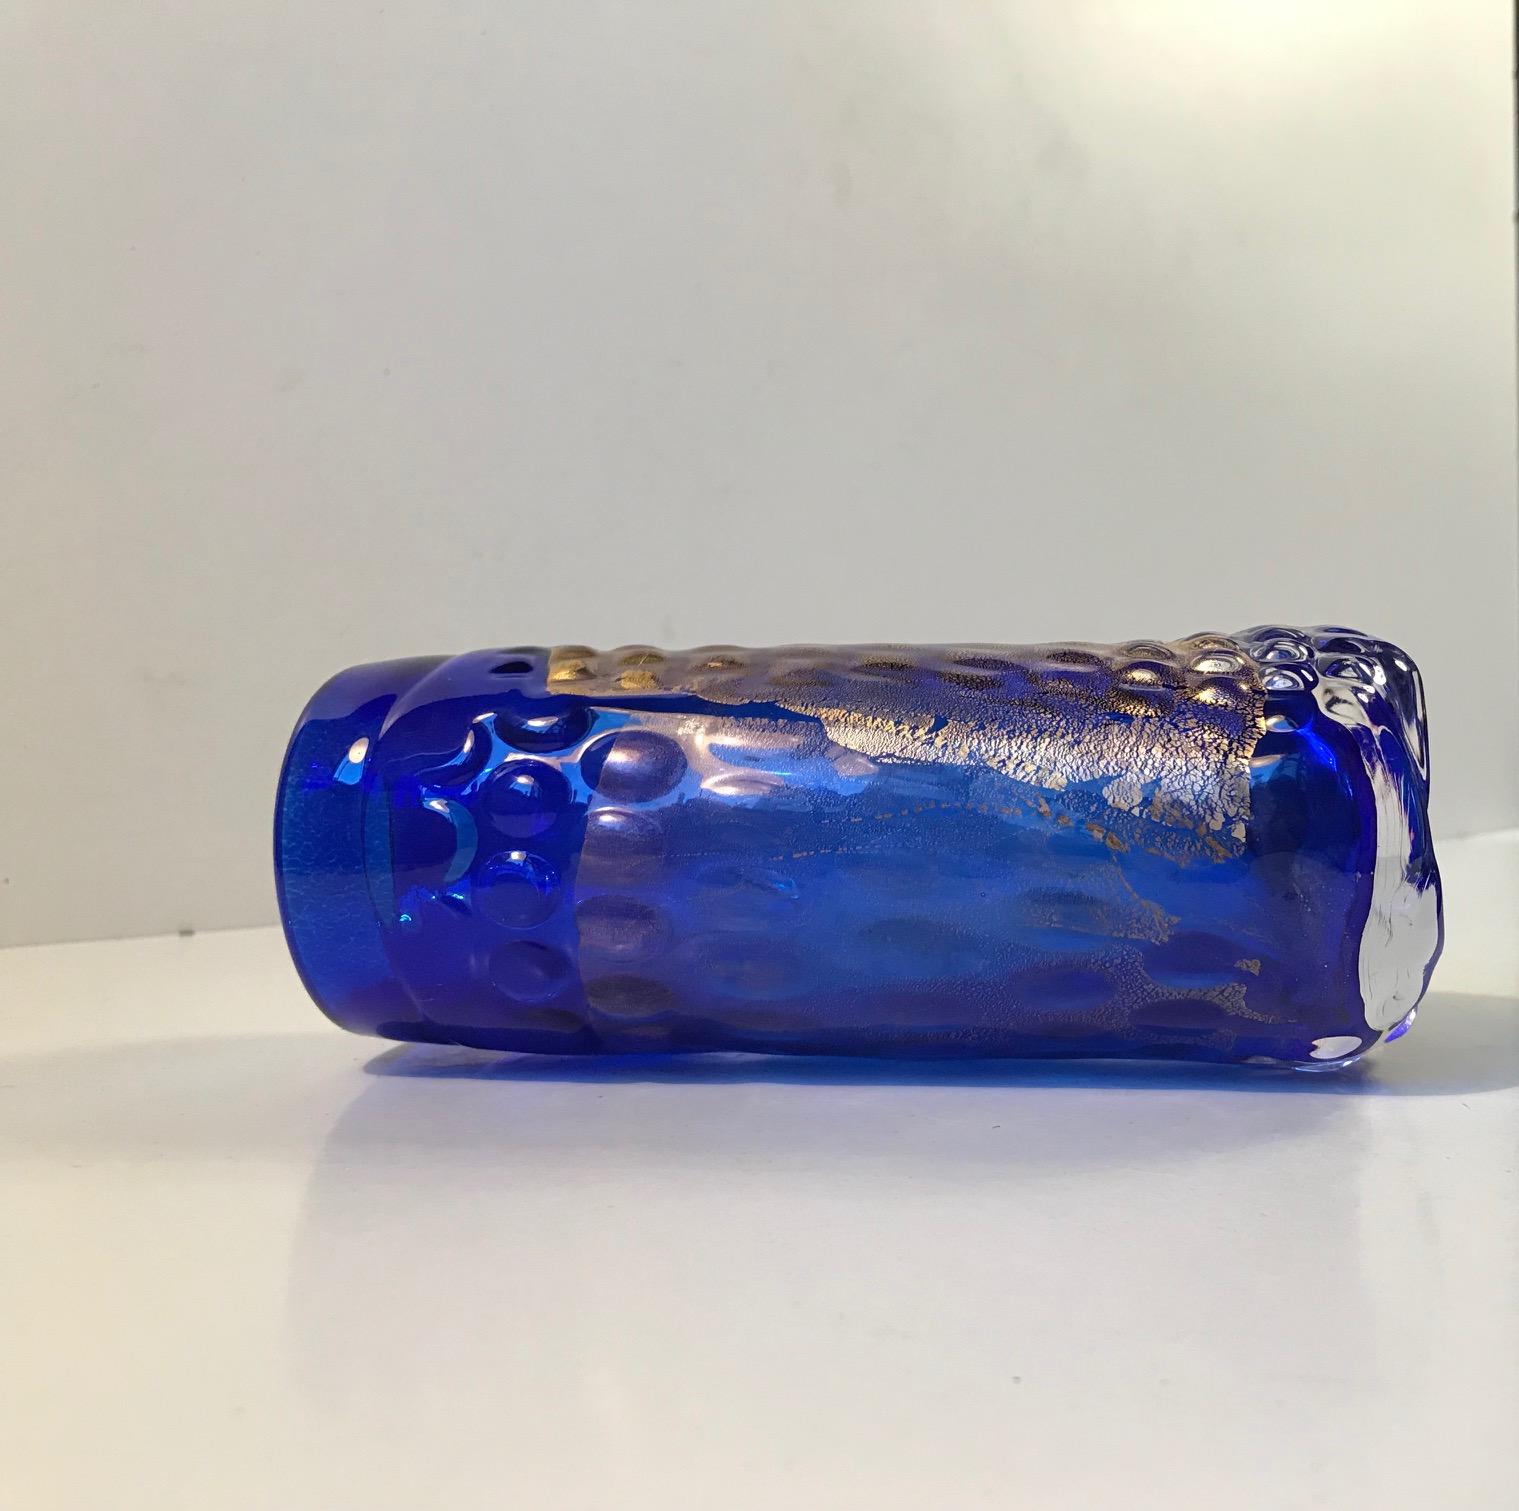 Danish Scandinavian Blue Gold Infused Art Glass Vase by Tchai Munch For Sale